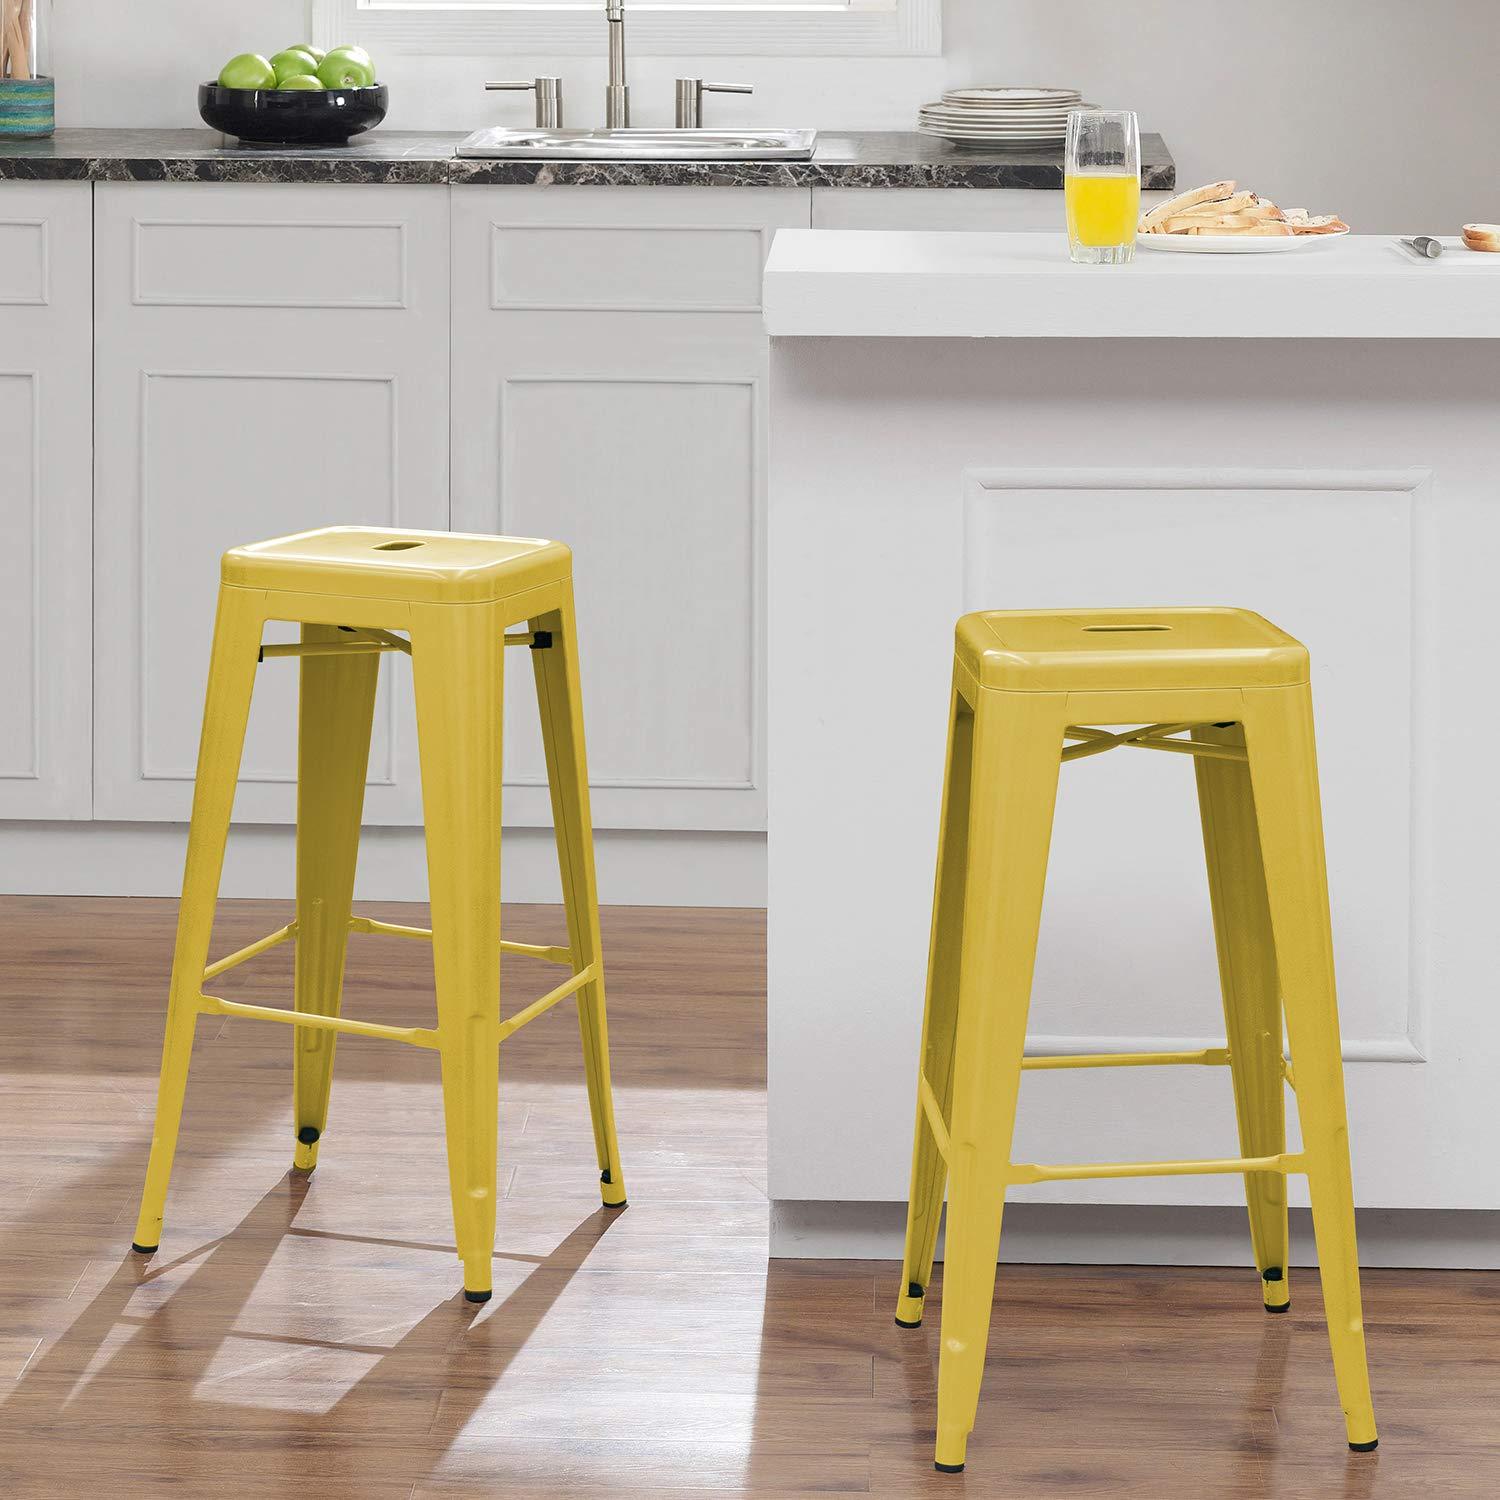 Furniwell 30 Inches Metal Bar Stools High Backless Tolix Indoor-Outdoor Stackable Barstool with Square Counter Seat Set of 4 (Yellow) - CookCave